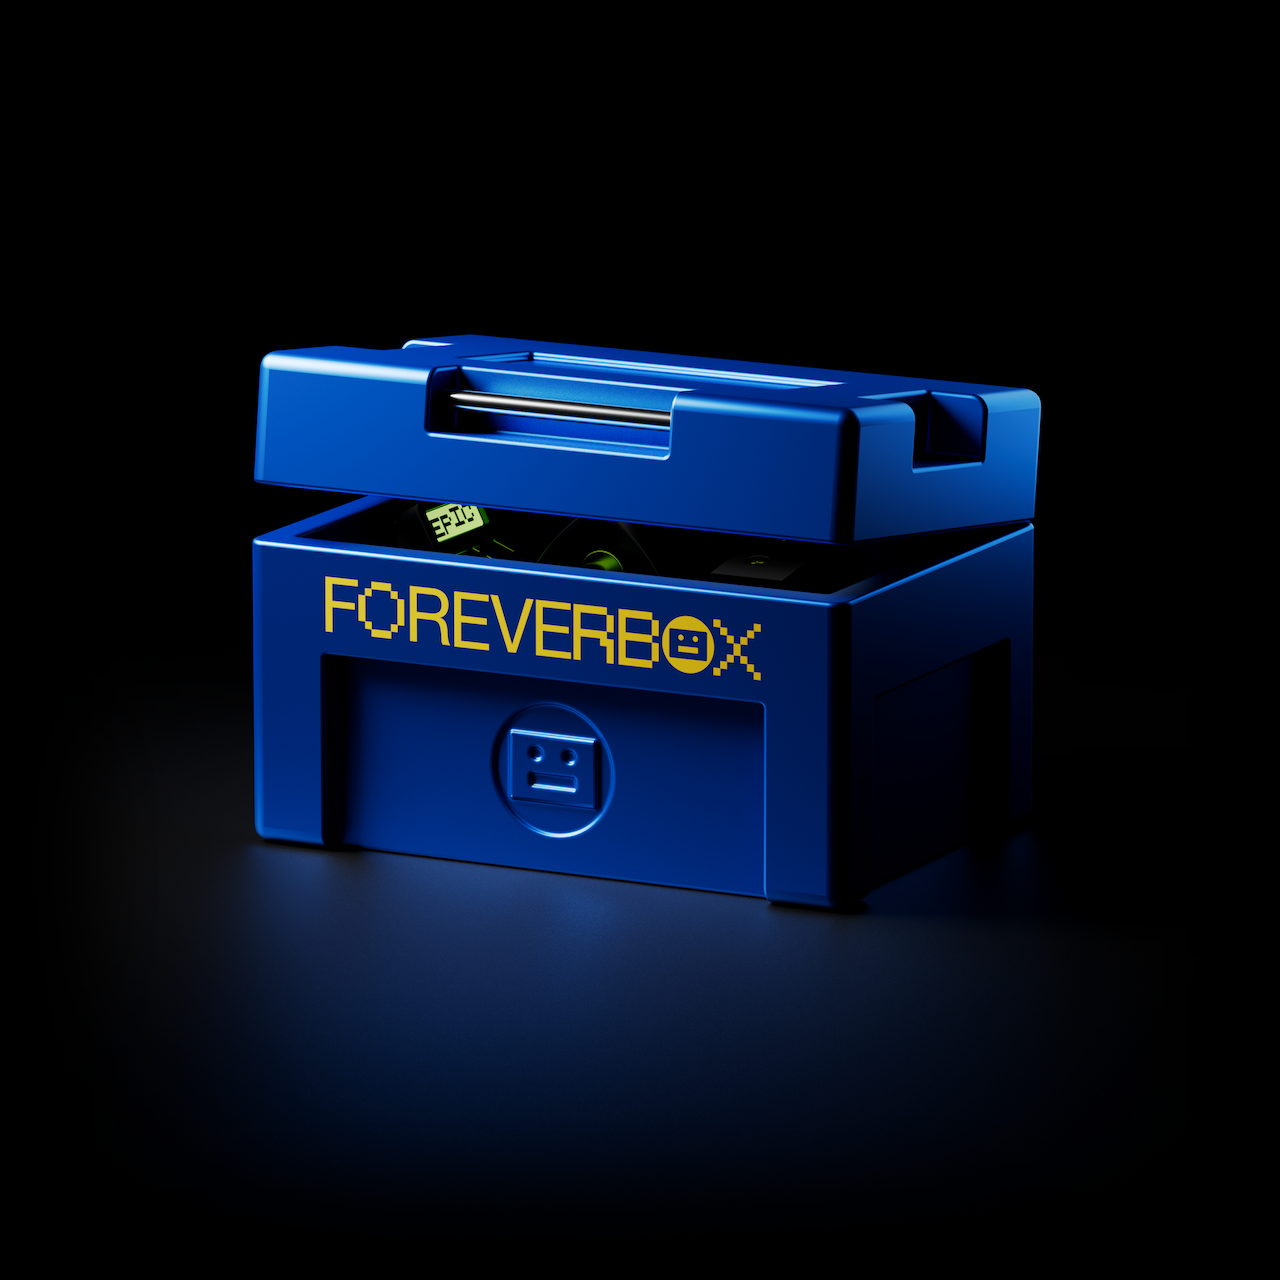 Foreverbox